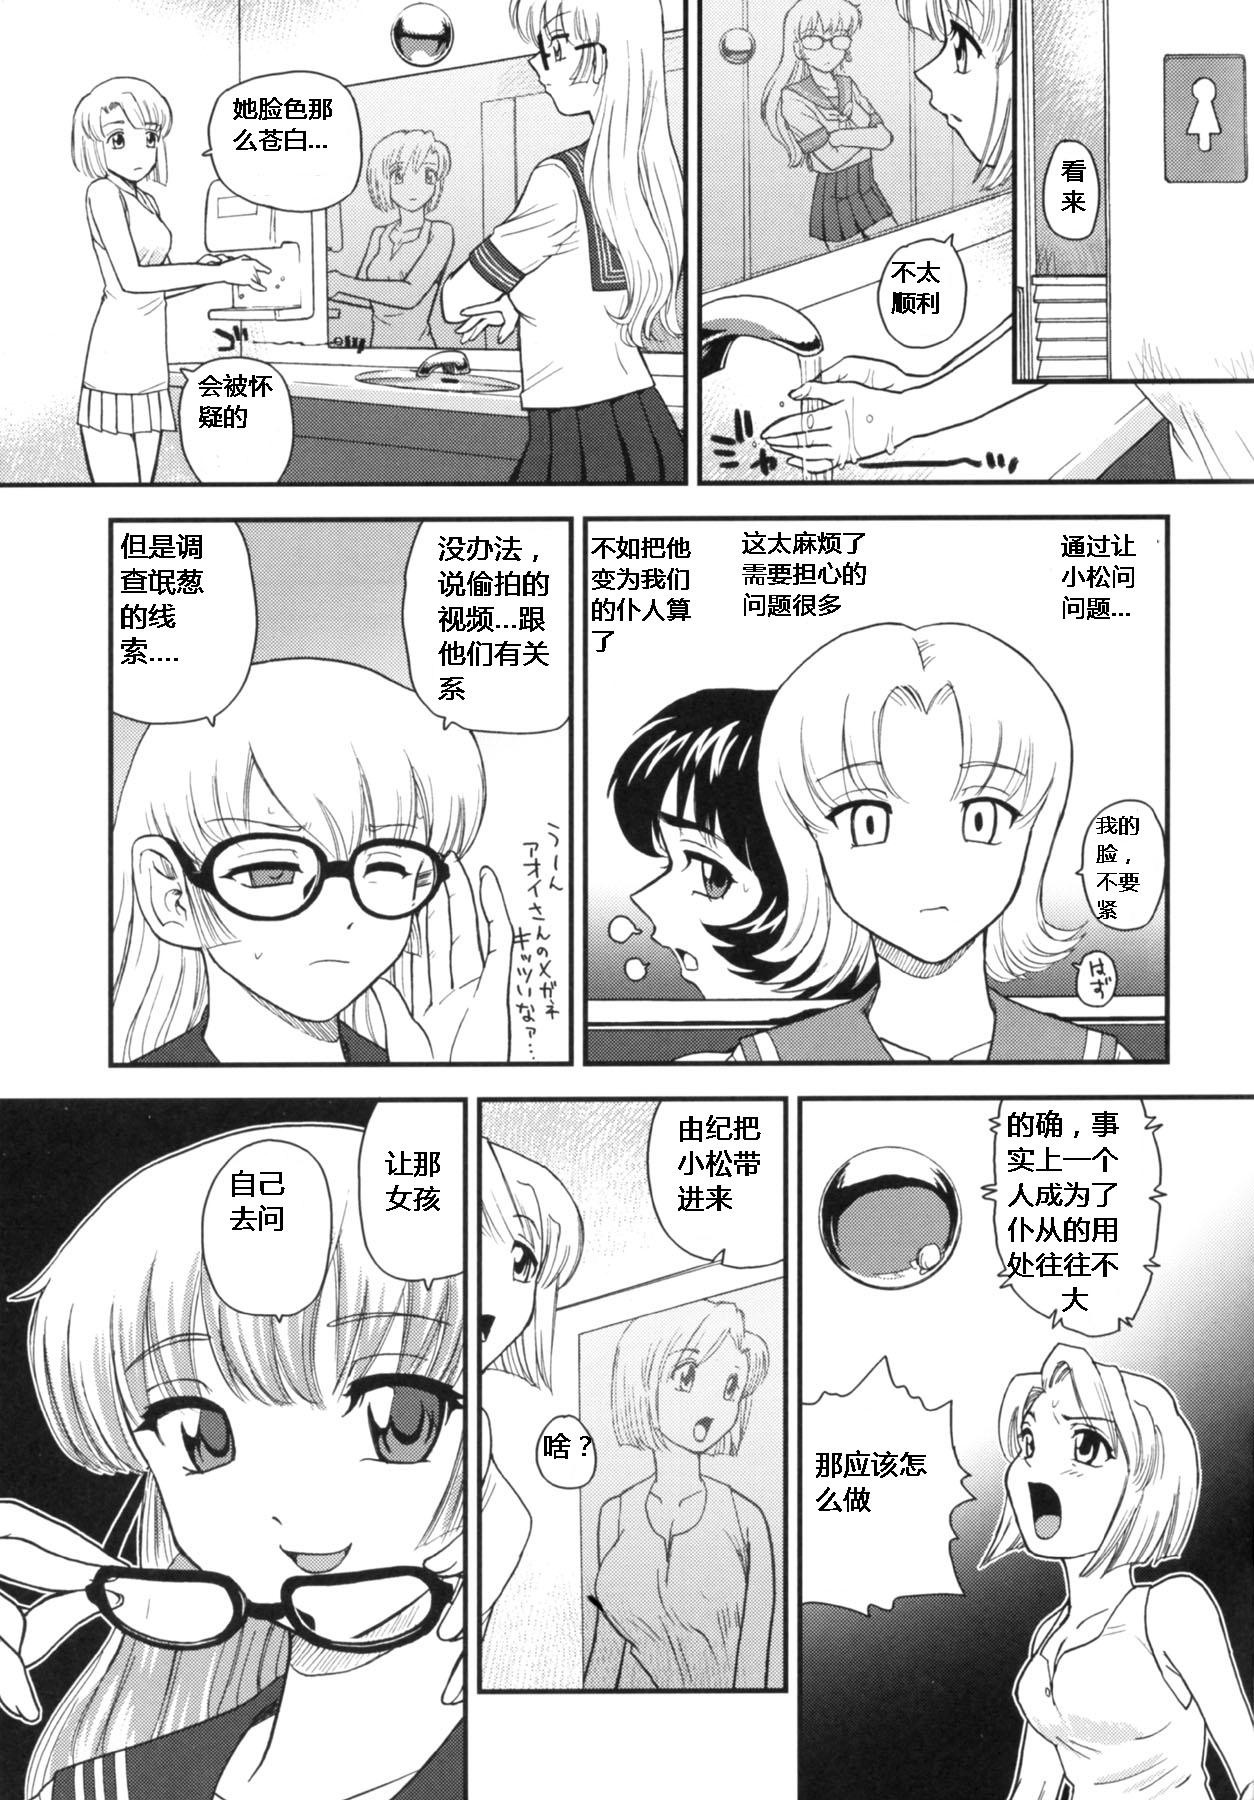 (Futaket 5) [Behind Moon (Q)] Dulce Report 10 [Chinese] 13